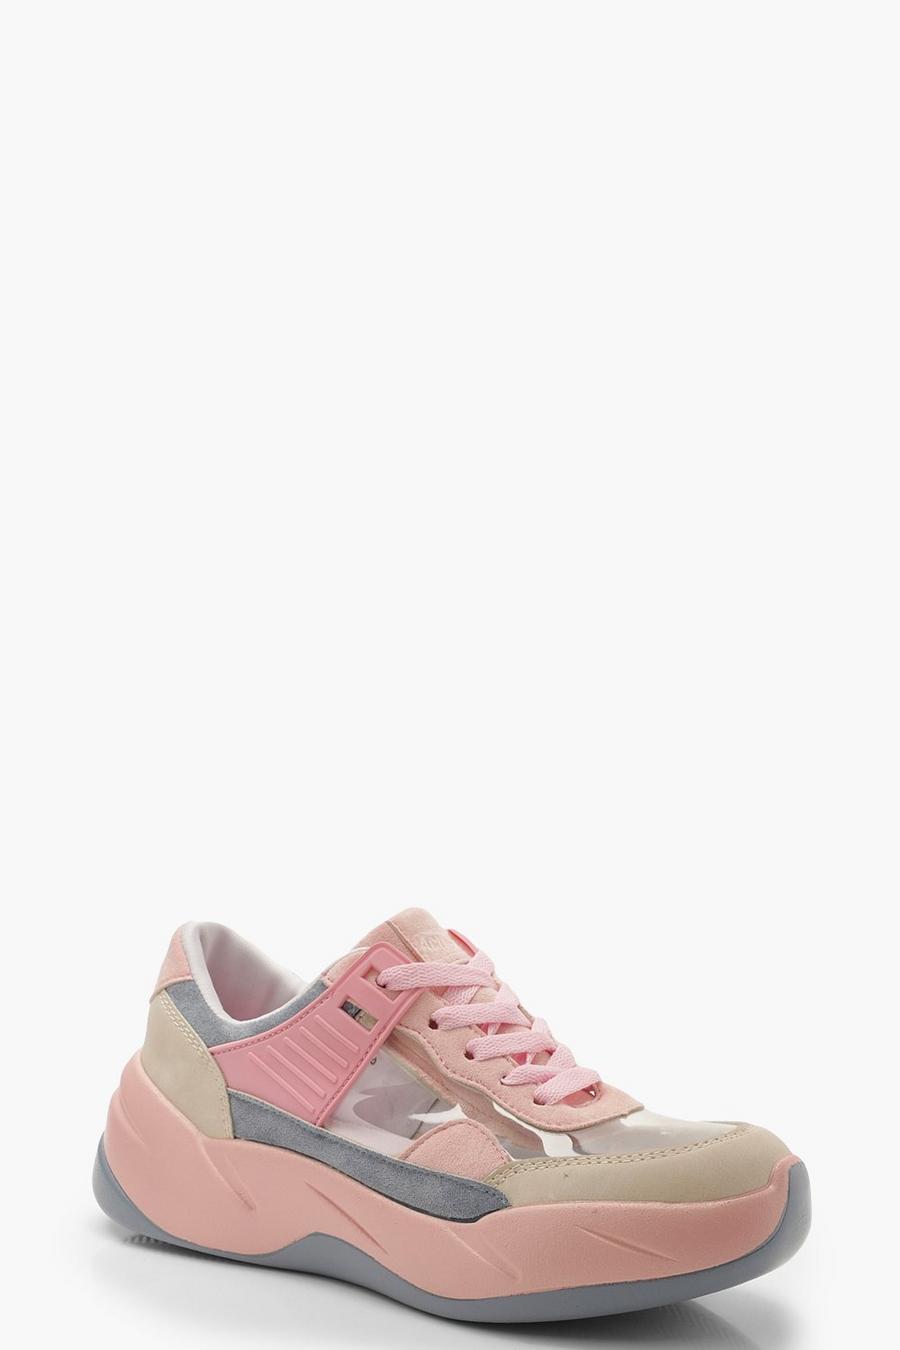 Clear Panel Multi Colour Sneakers image number 1